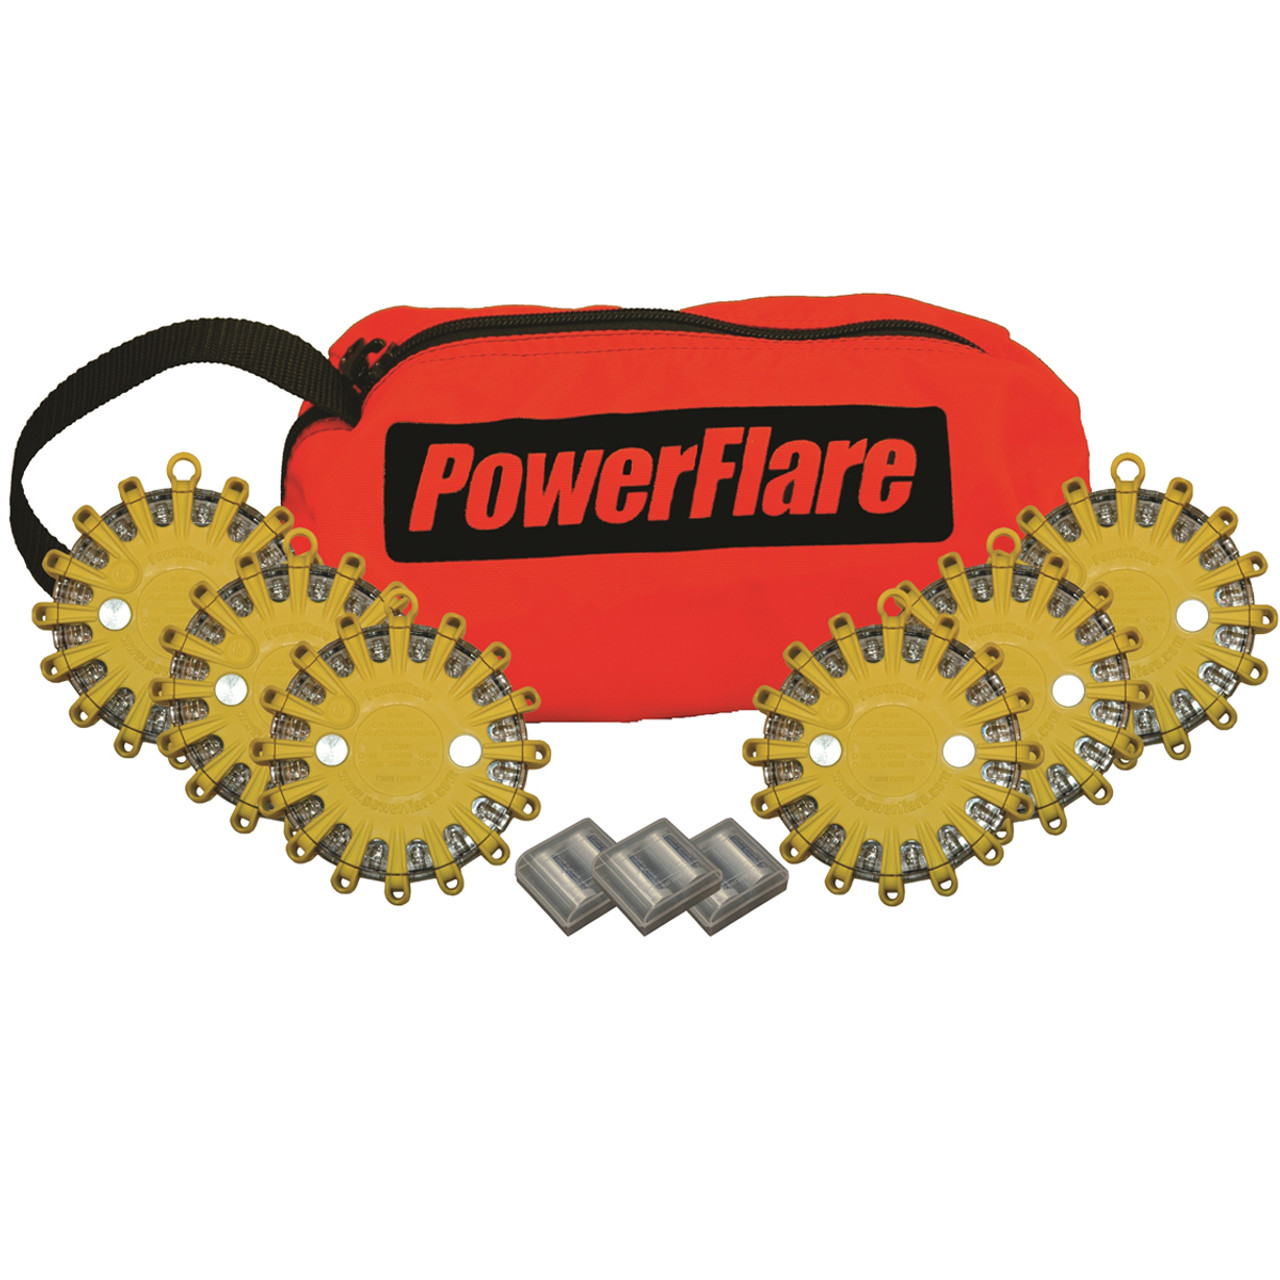 PowerFlare PF-200 LED Safety Light 